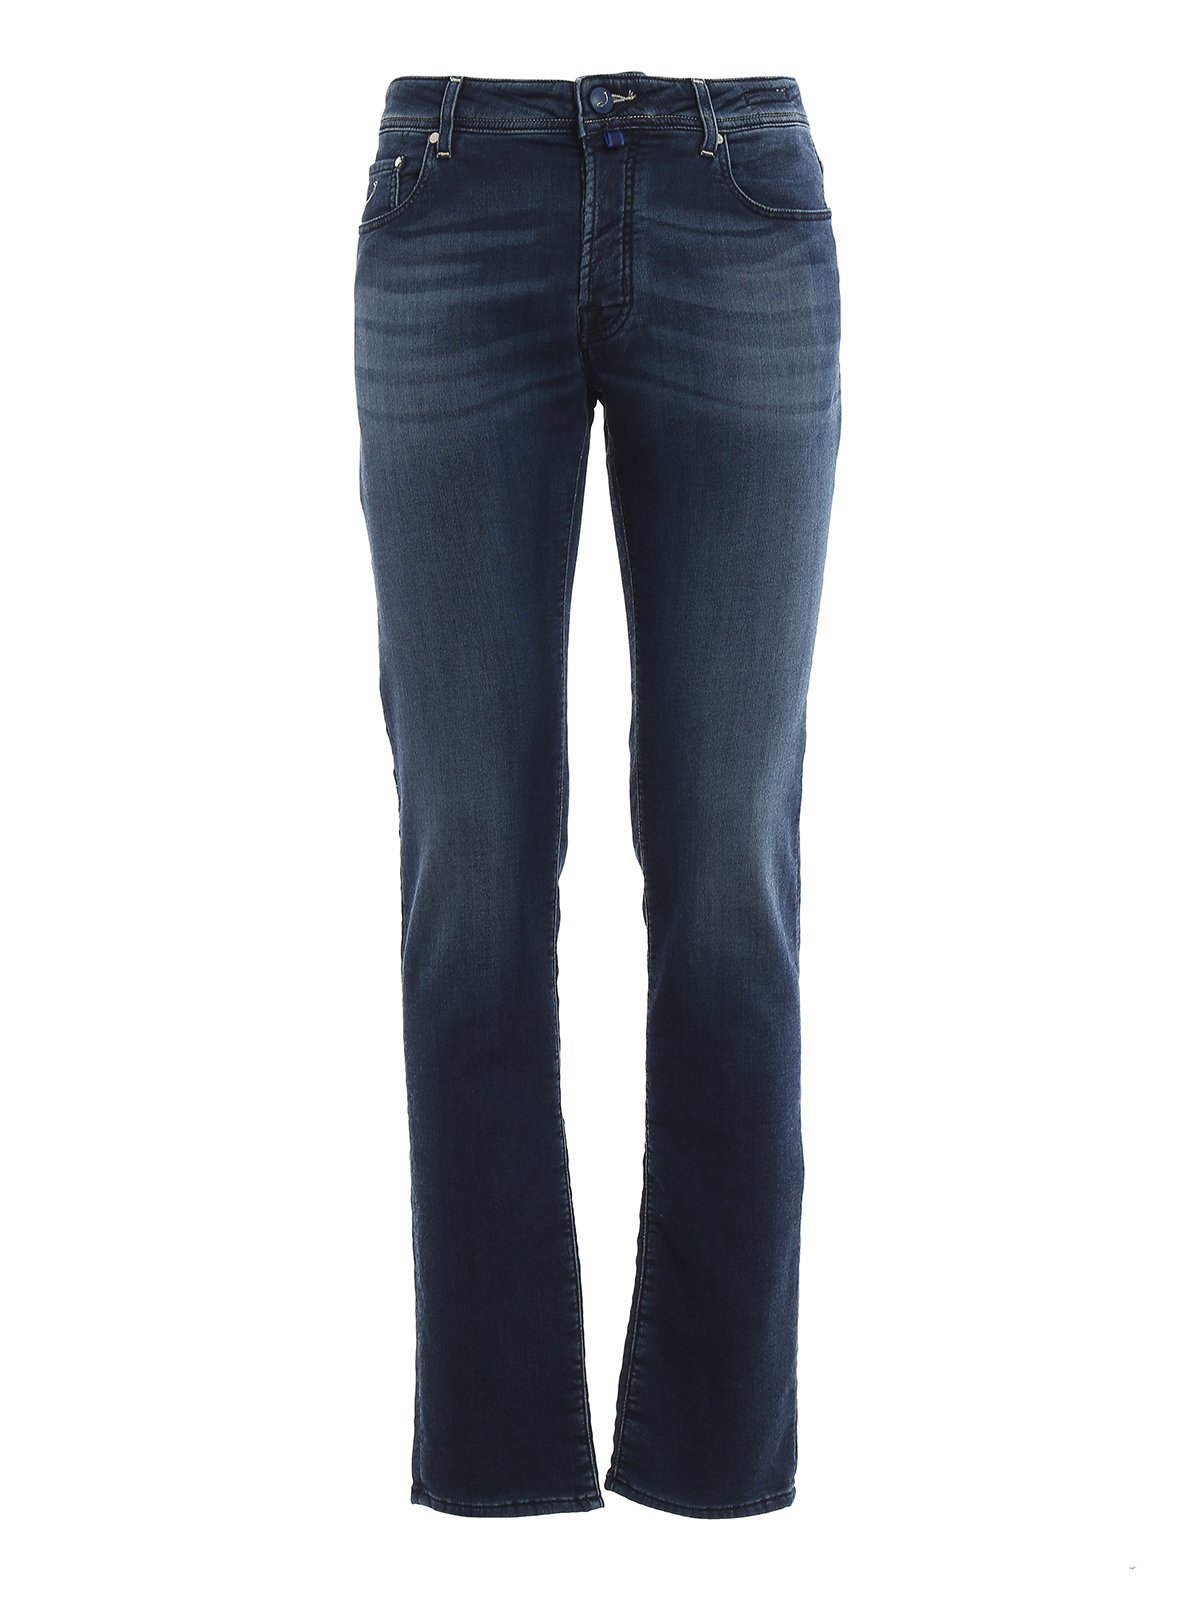 JACOB COHEN STYLE 688 COTTON AND WOOL JEANS